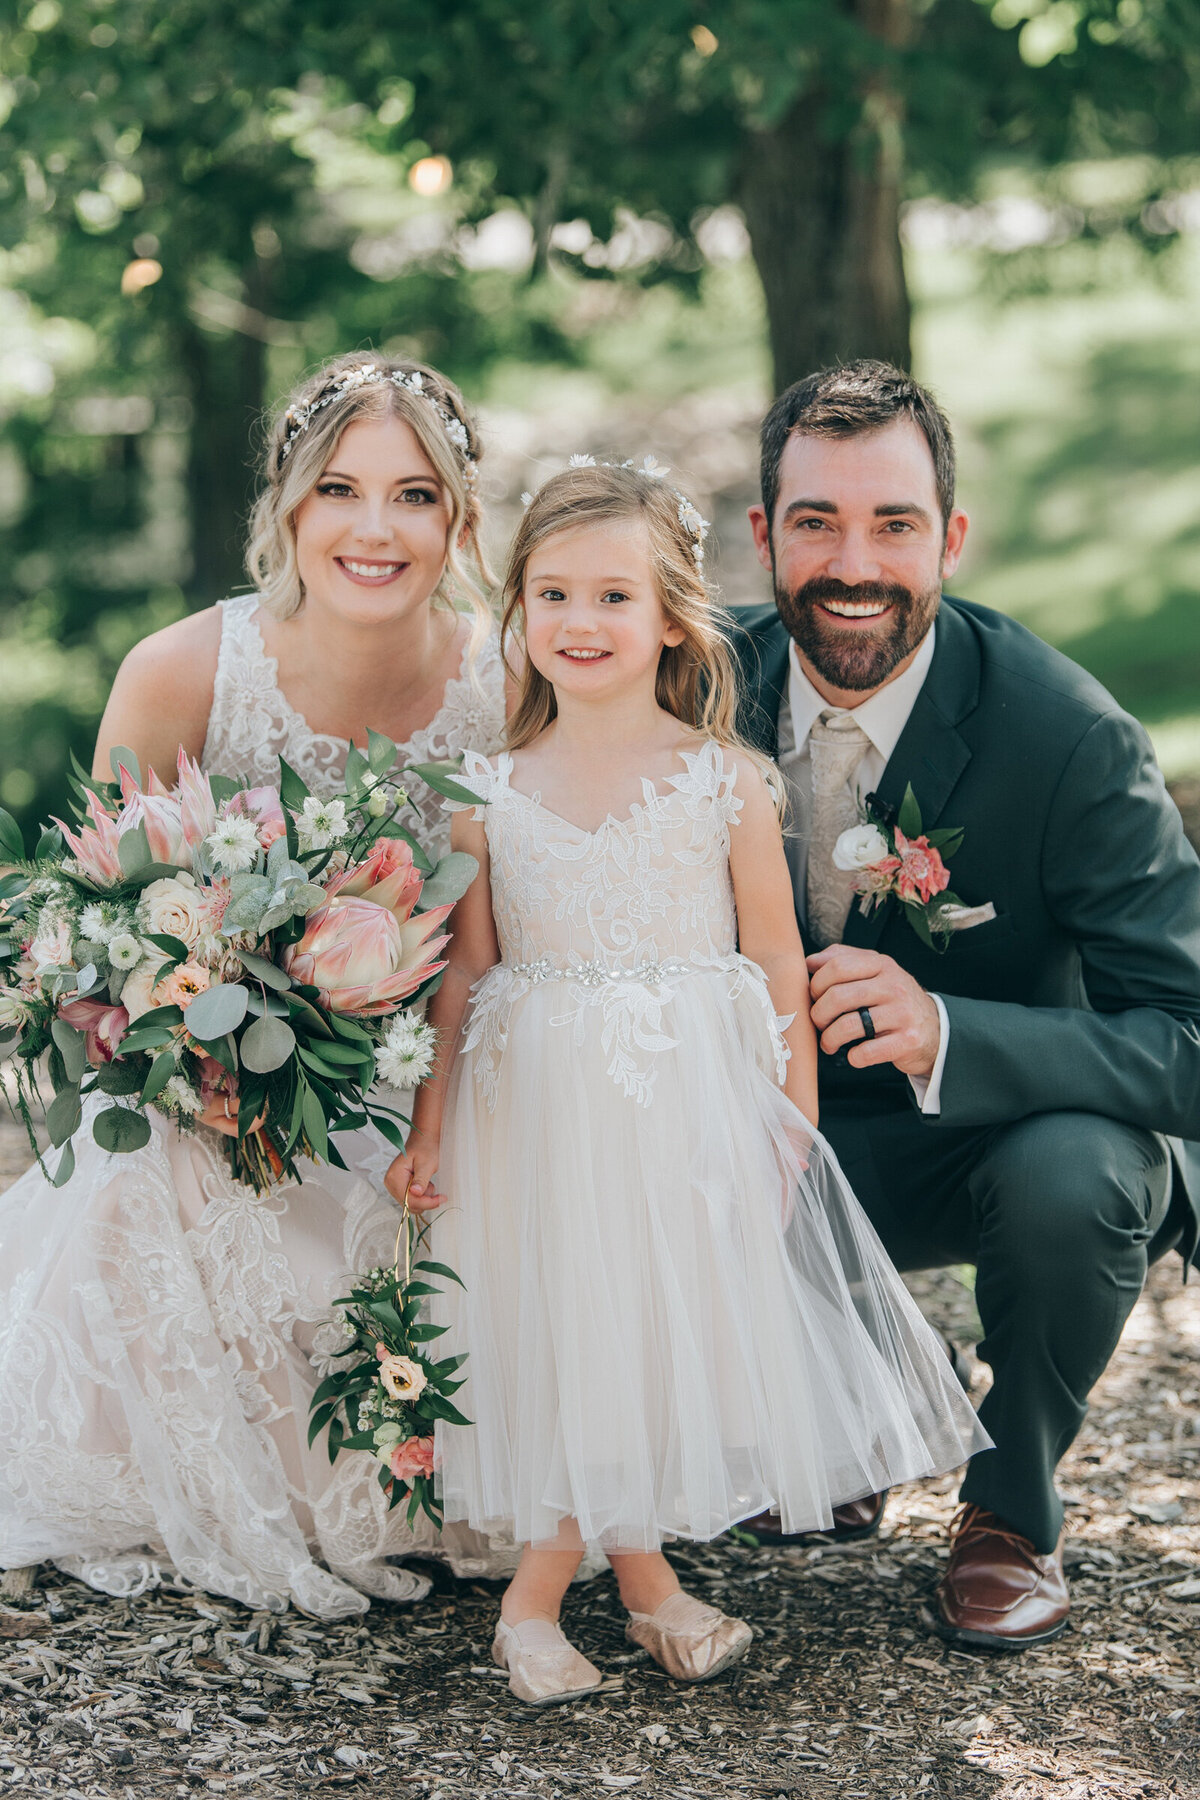 Bride and groom posing with their daughter, the flower girl, on their Summer wedding day